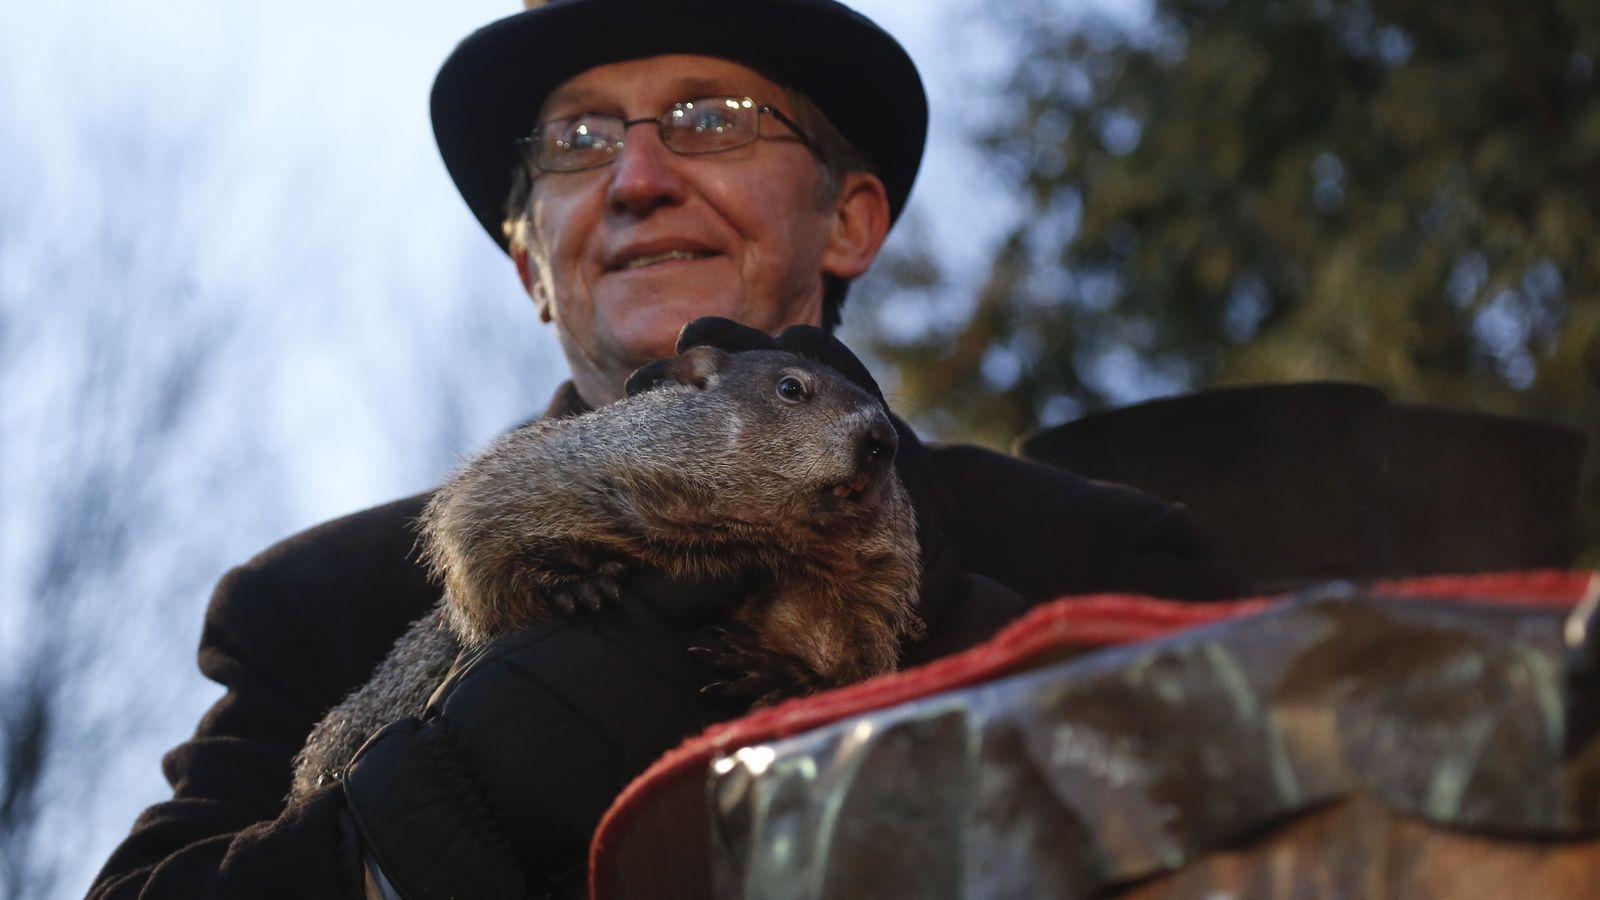 Groundhog Day 2017 predictions: Will Punxsutawney Phil see his shadow?